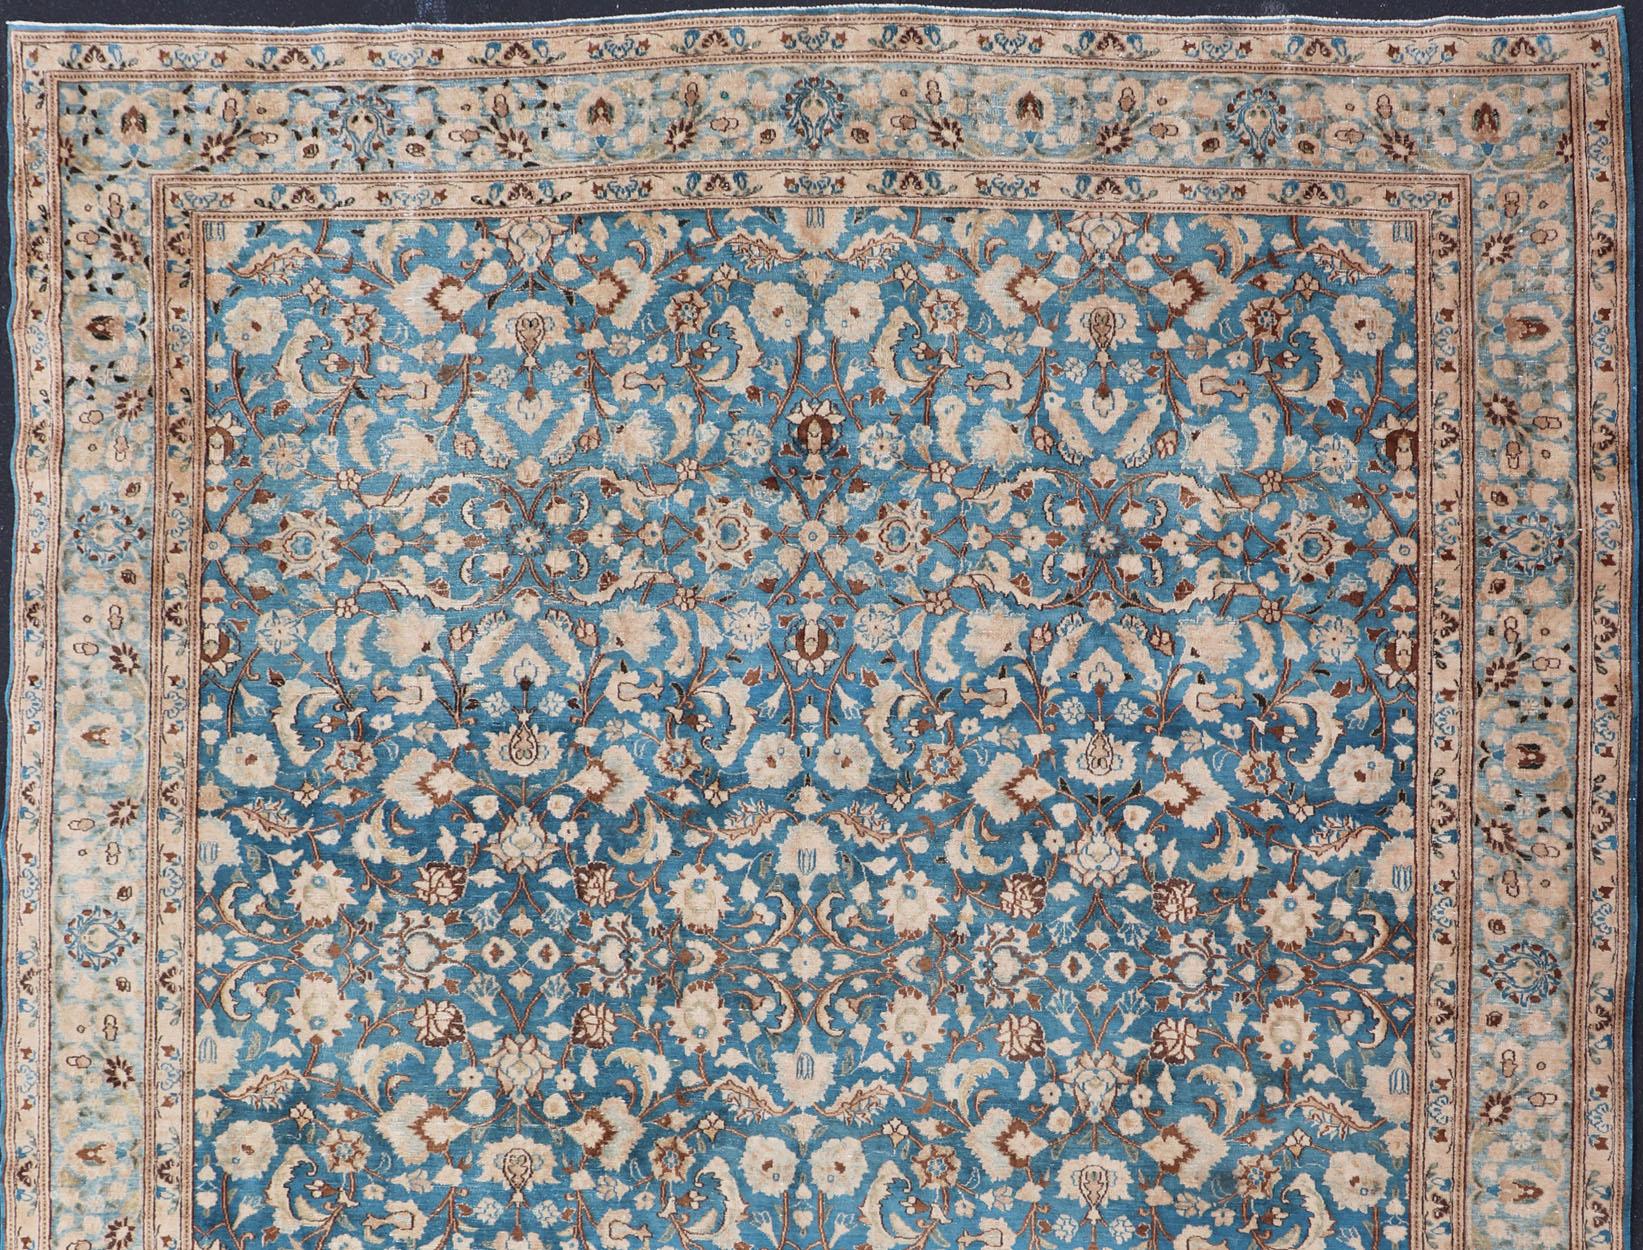 Turquoise blue background with light blue border and light brown highlights antique all-over geometric Persian Khorassan rug, rug V21-0118, country of origin / type: Iran / Khorassan, circa 1920

This antique Persian Khorassan carpet from 1920s